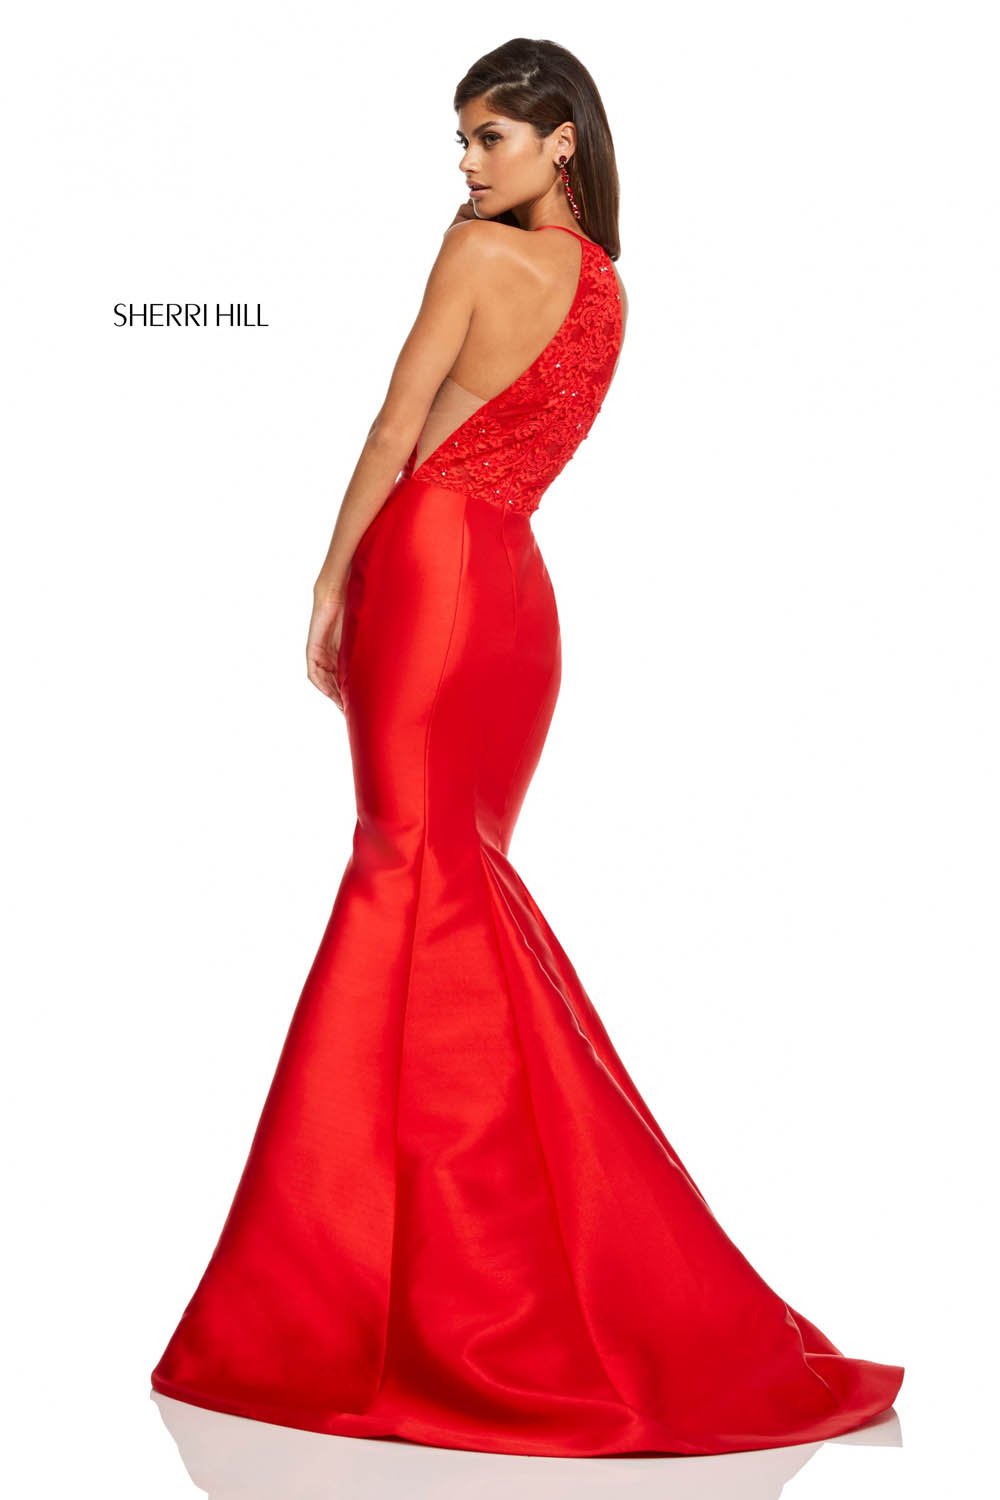 Sherri Hill 52575 dress images in these colors: Red, Black, Yellow, Light Blue, Light Pink, Ivory.